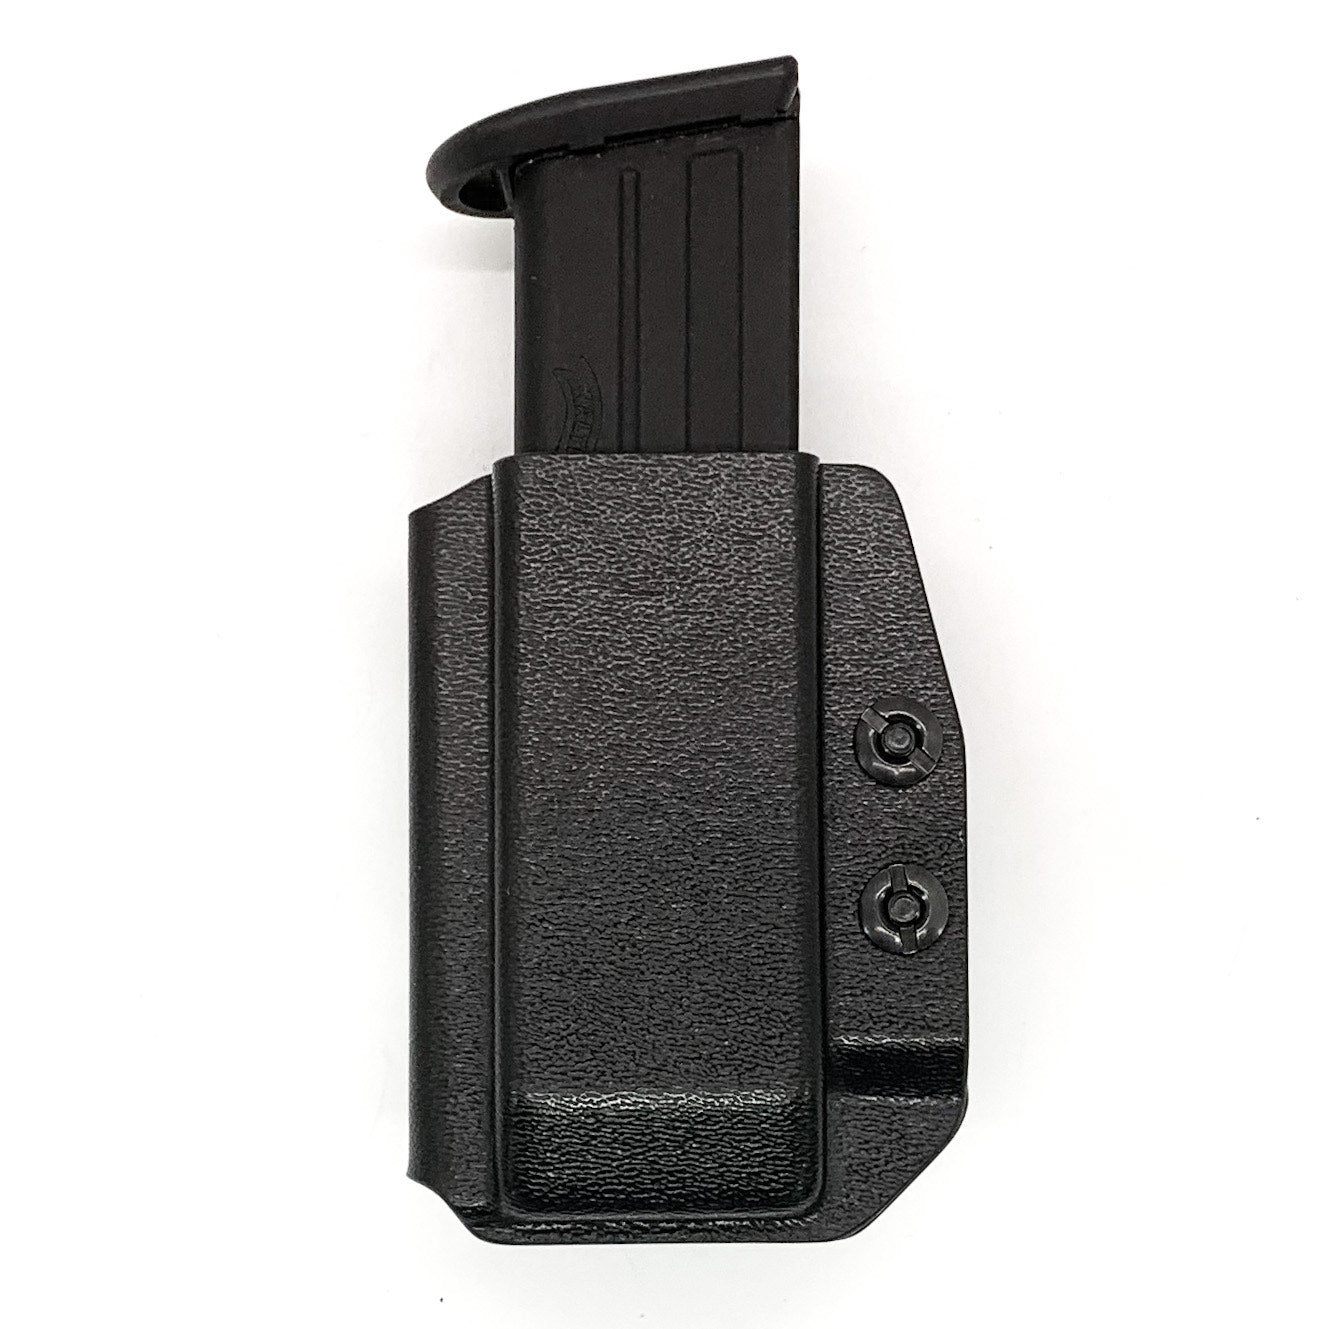 For the best, Inside Waistband IWB AIWB Walther PDP 9mm & .40 magazine carrier, holster, & pouch for the Sig P320, P365, P365XL, Glock 17, 17L, 19, 22, 23, 26, 27, 34, 35, 45, 31, 32, 33, .357 Sig, Smith & Wesson, Arex, H&K, and 509, 509T, LS EDGE FN magazines, shop Four Brothers Holsters. 4BROS, Made in the USA